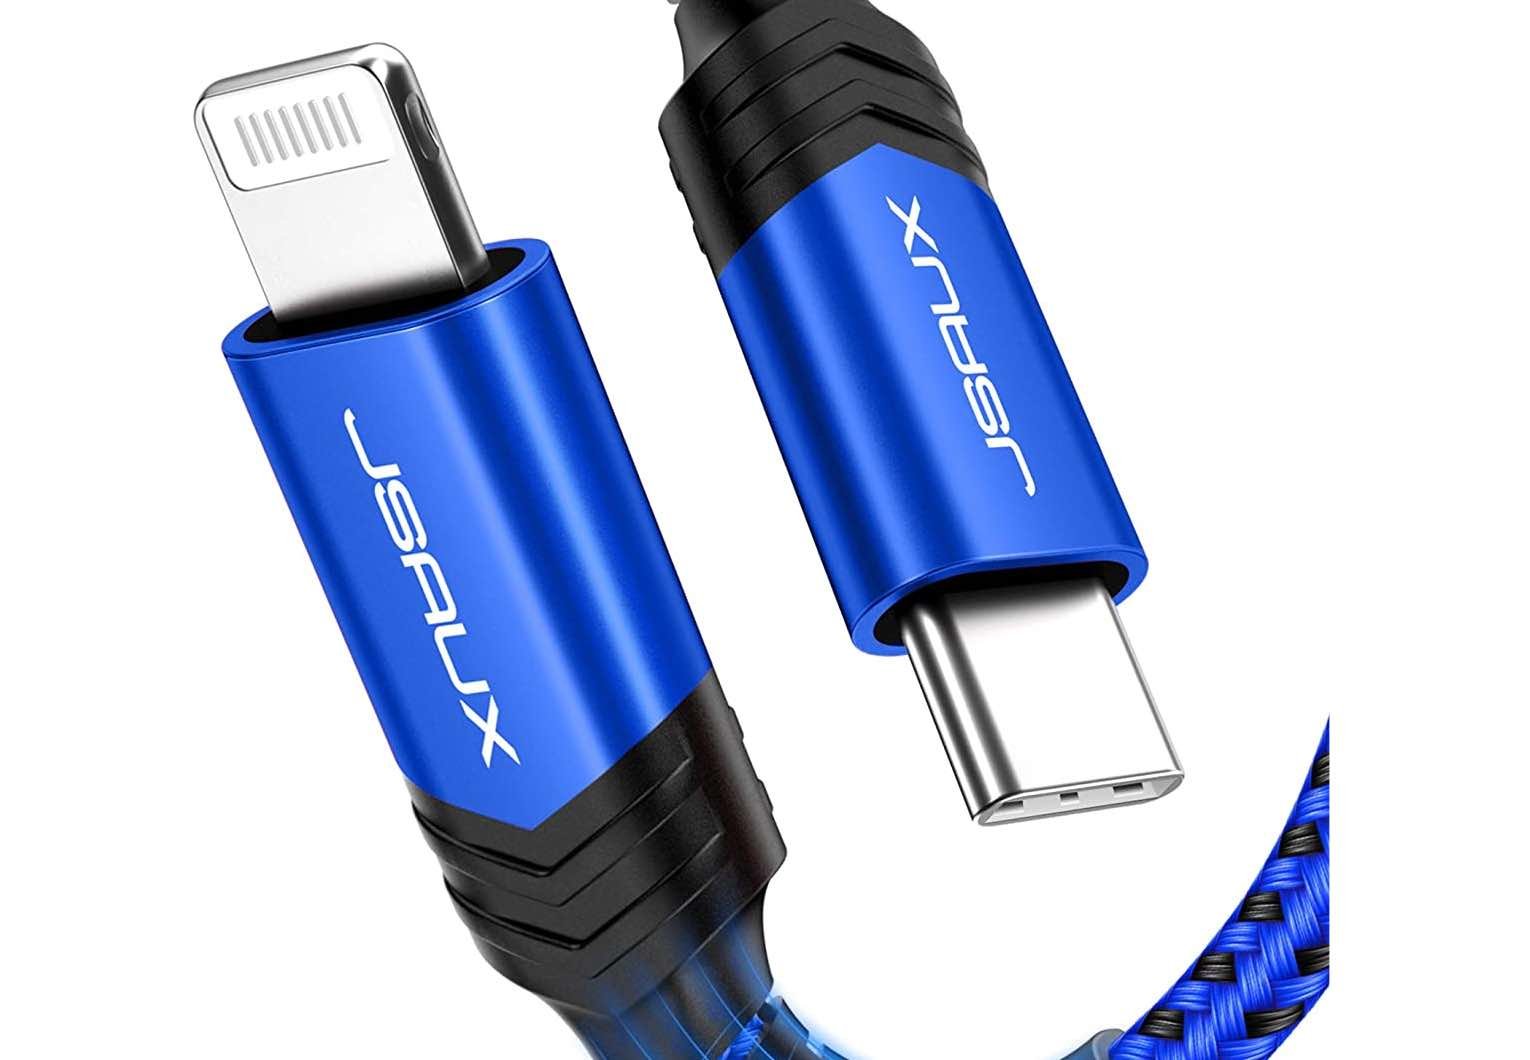 Pickup This 14 Well Rated USB C To Lightning Cable For iPhone That